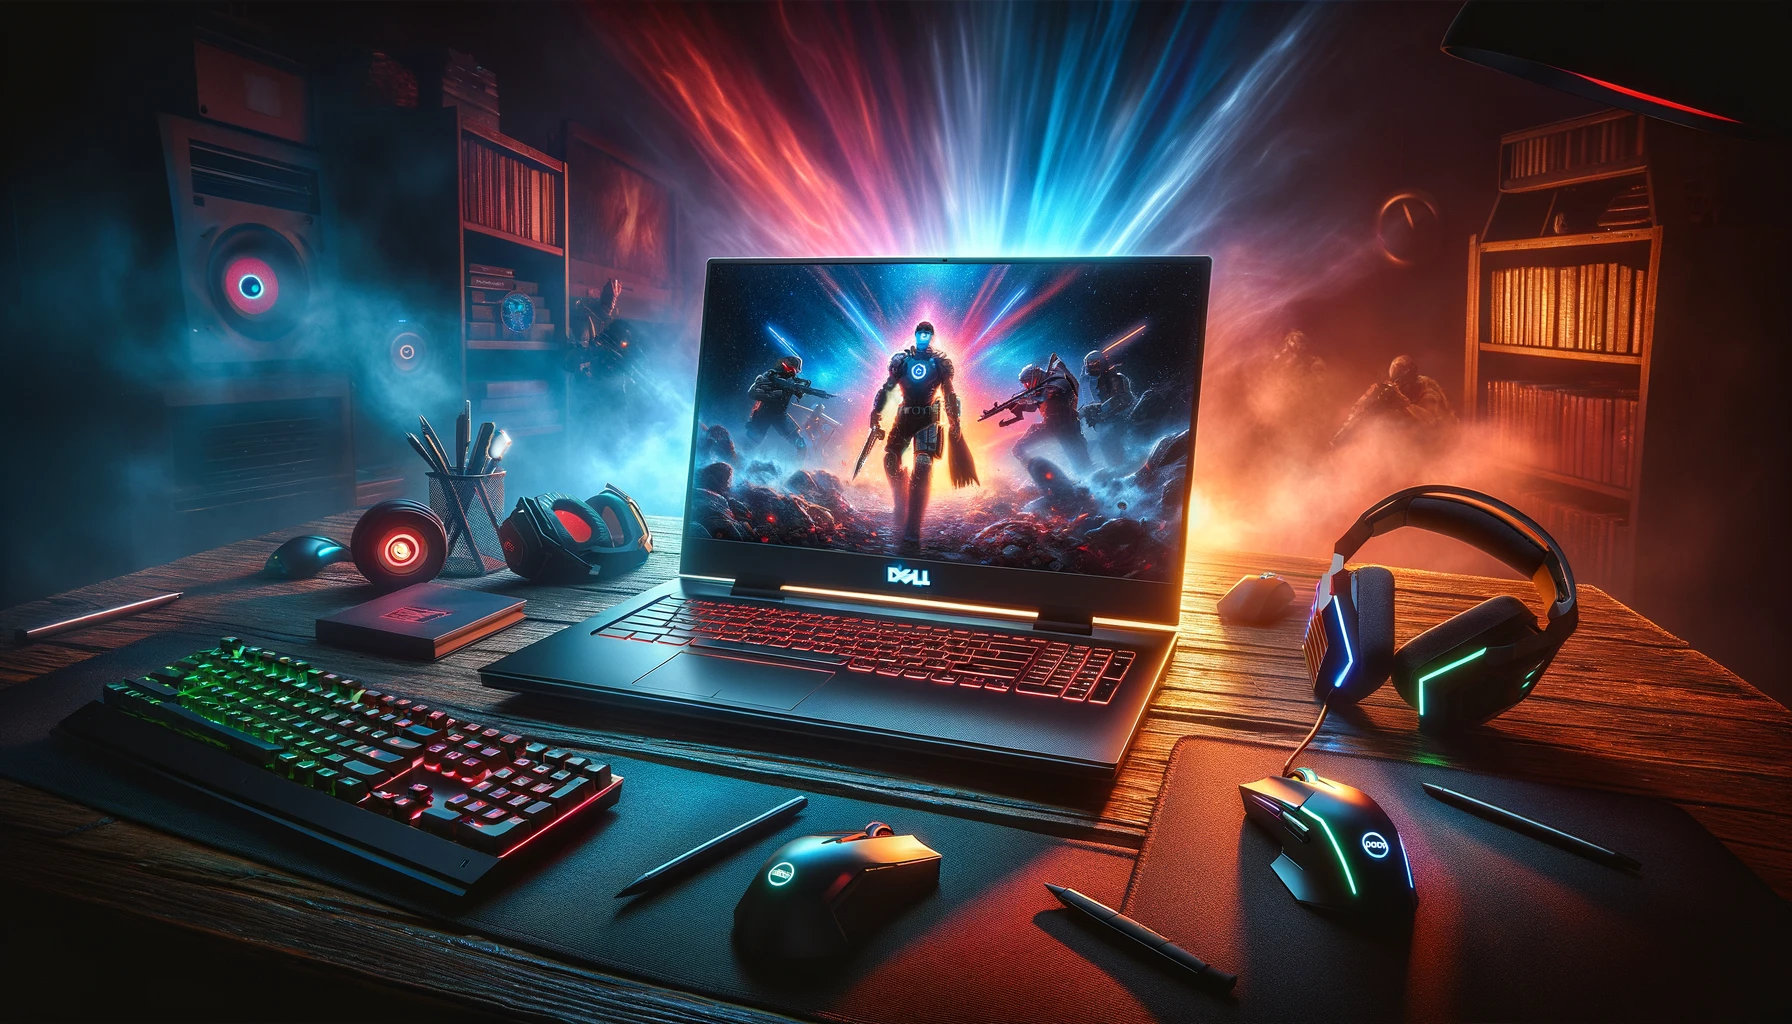 The image above captures a Dell gaming laptop, model G5, set in a dynamic gaming environment, highlighted by RGB lighting and equipped with gaming peripherals, showcasing the intensity and excitement of gaming.